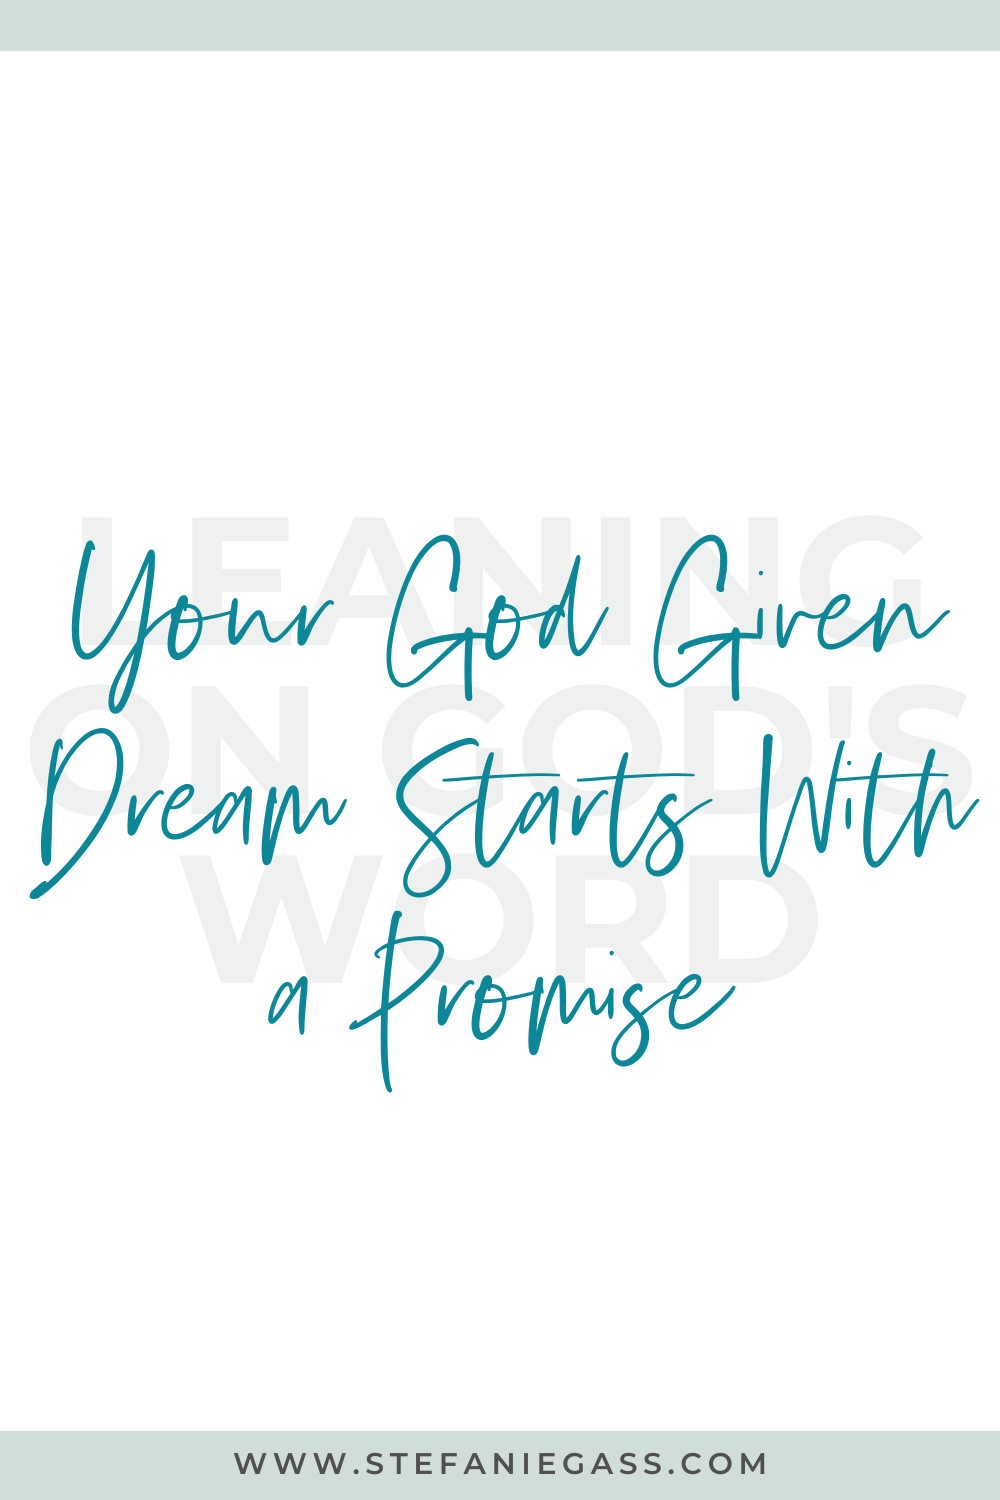 Text states" Your God Given Dream Starts With a Promise in teal lettering. On the background in light gray lettering it states "Leaning on God's Word". 